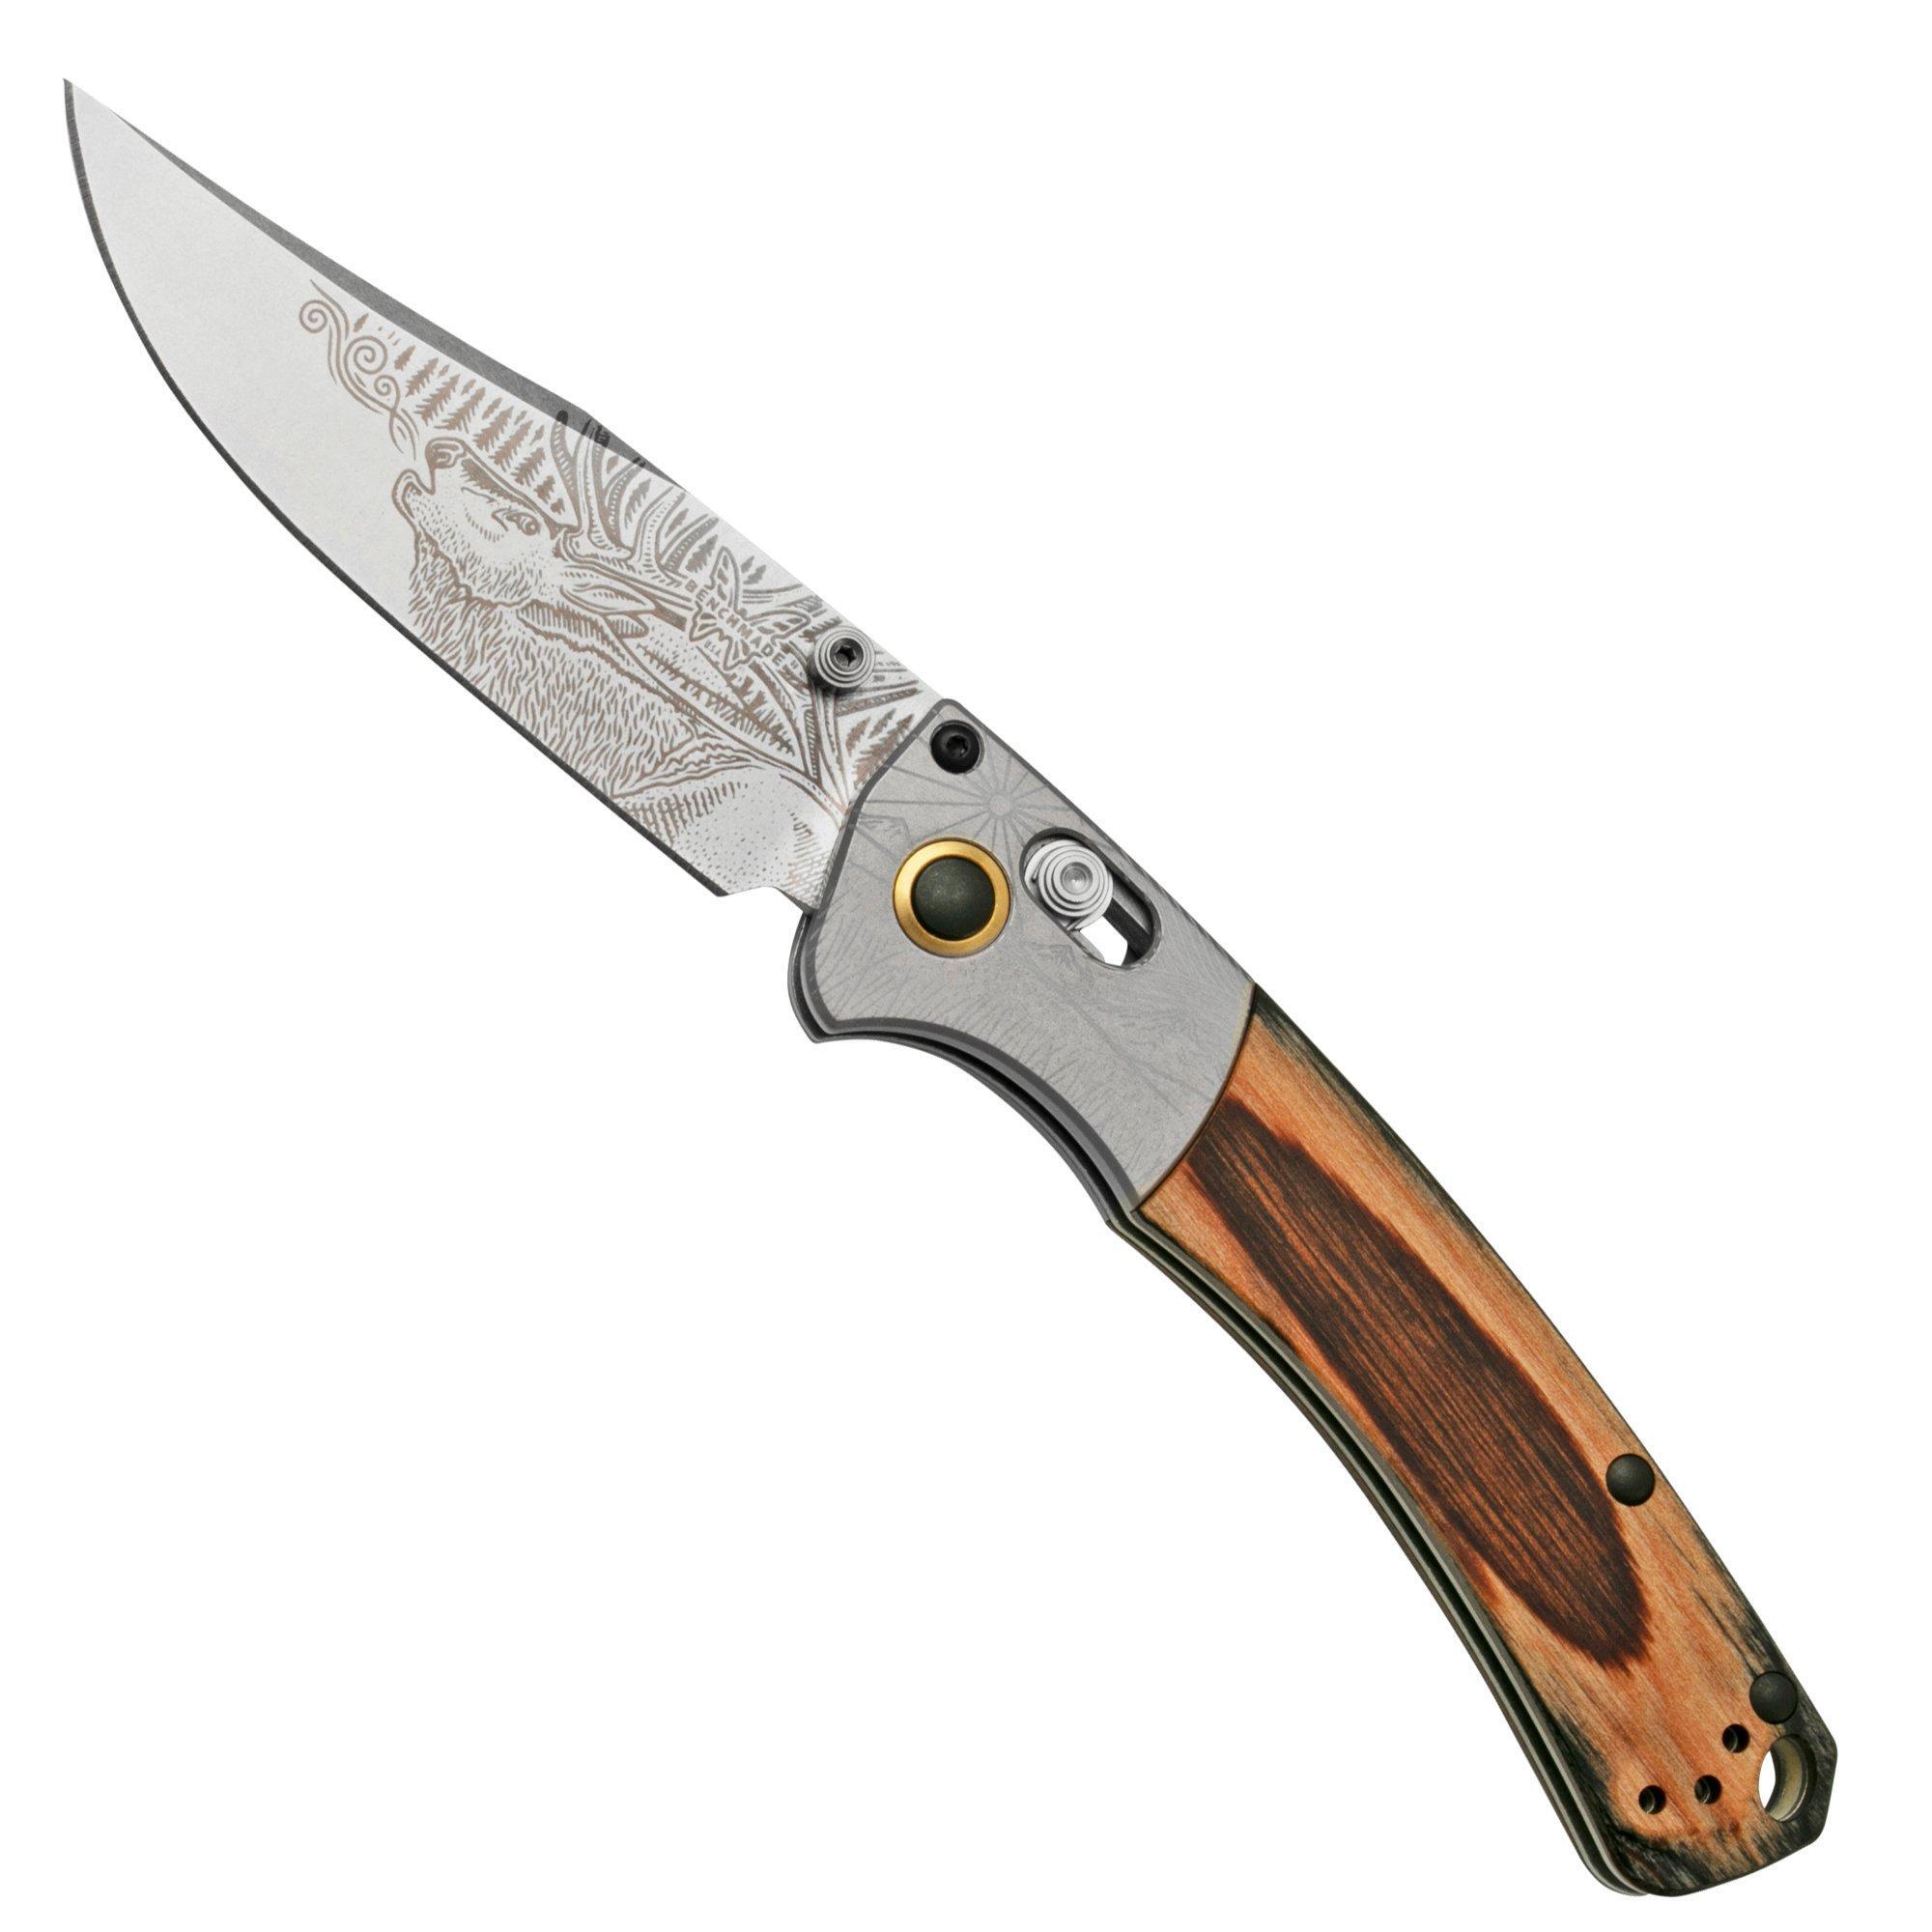 Benchmade Benchmade Mini Crooked River Bull Elk Limited Edition Artist Series 15085-2201, jachtzakmes, Casey Underwood design